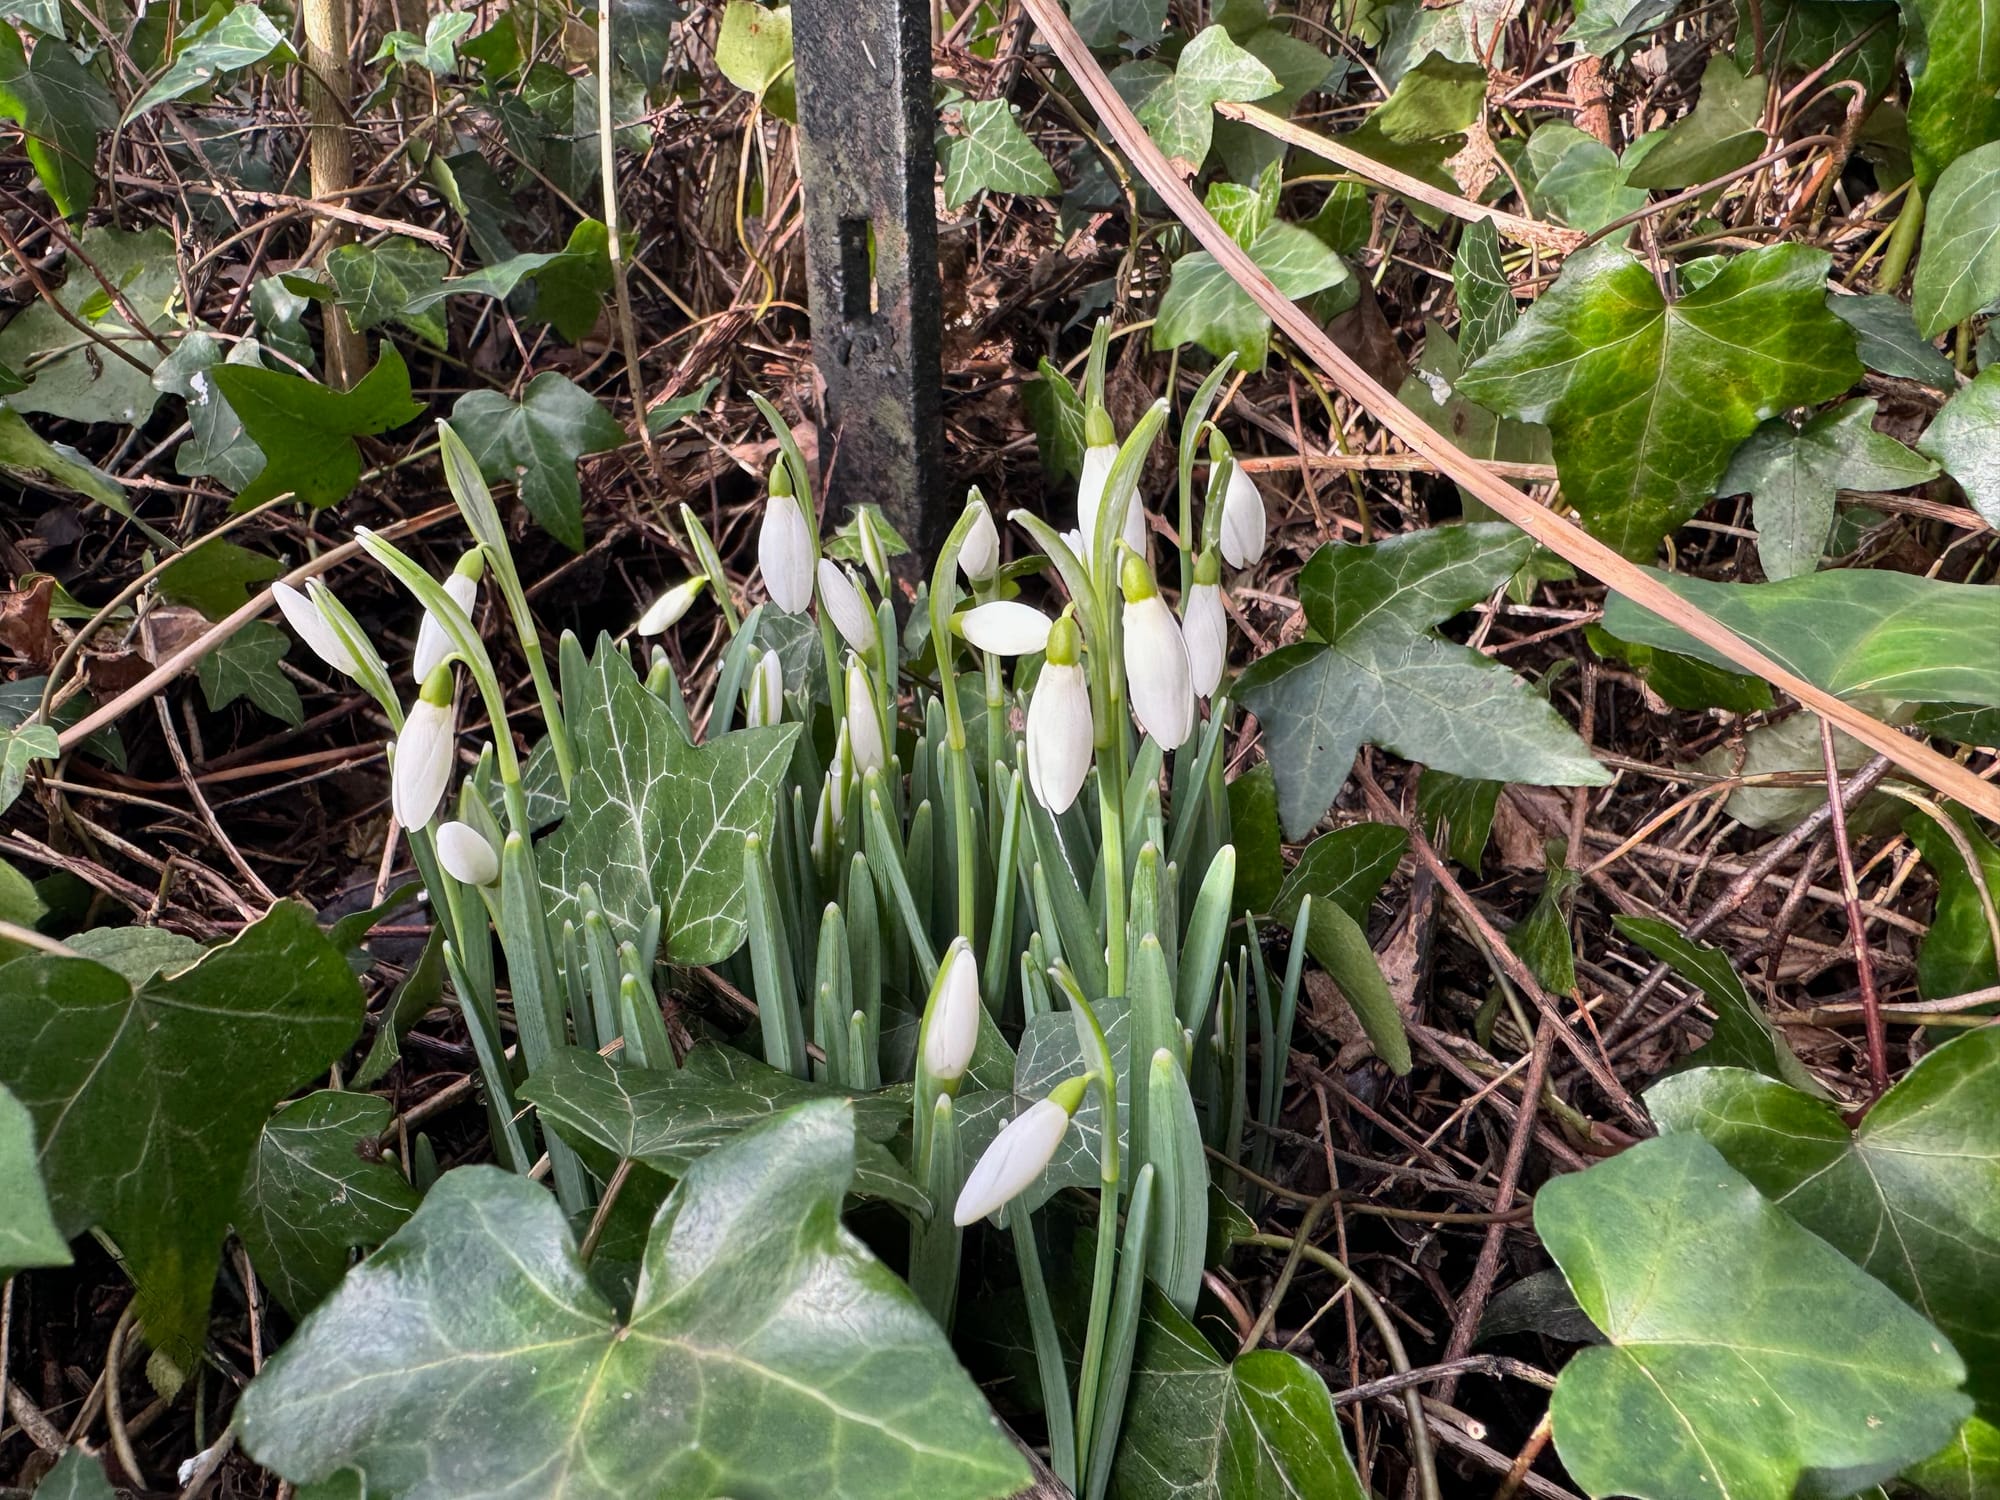 Clump of snowdrops emerging with their silvery leaves and in the early stages of blooming.  